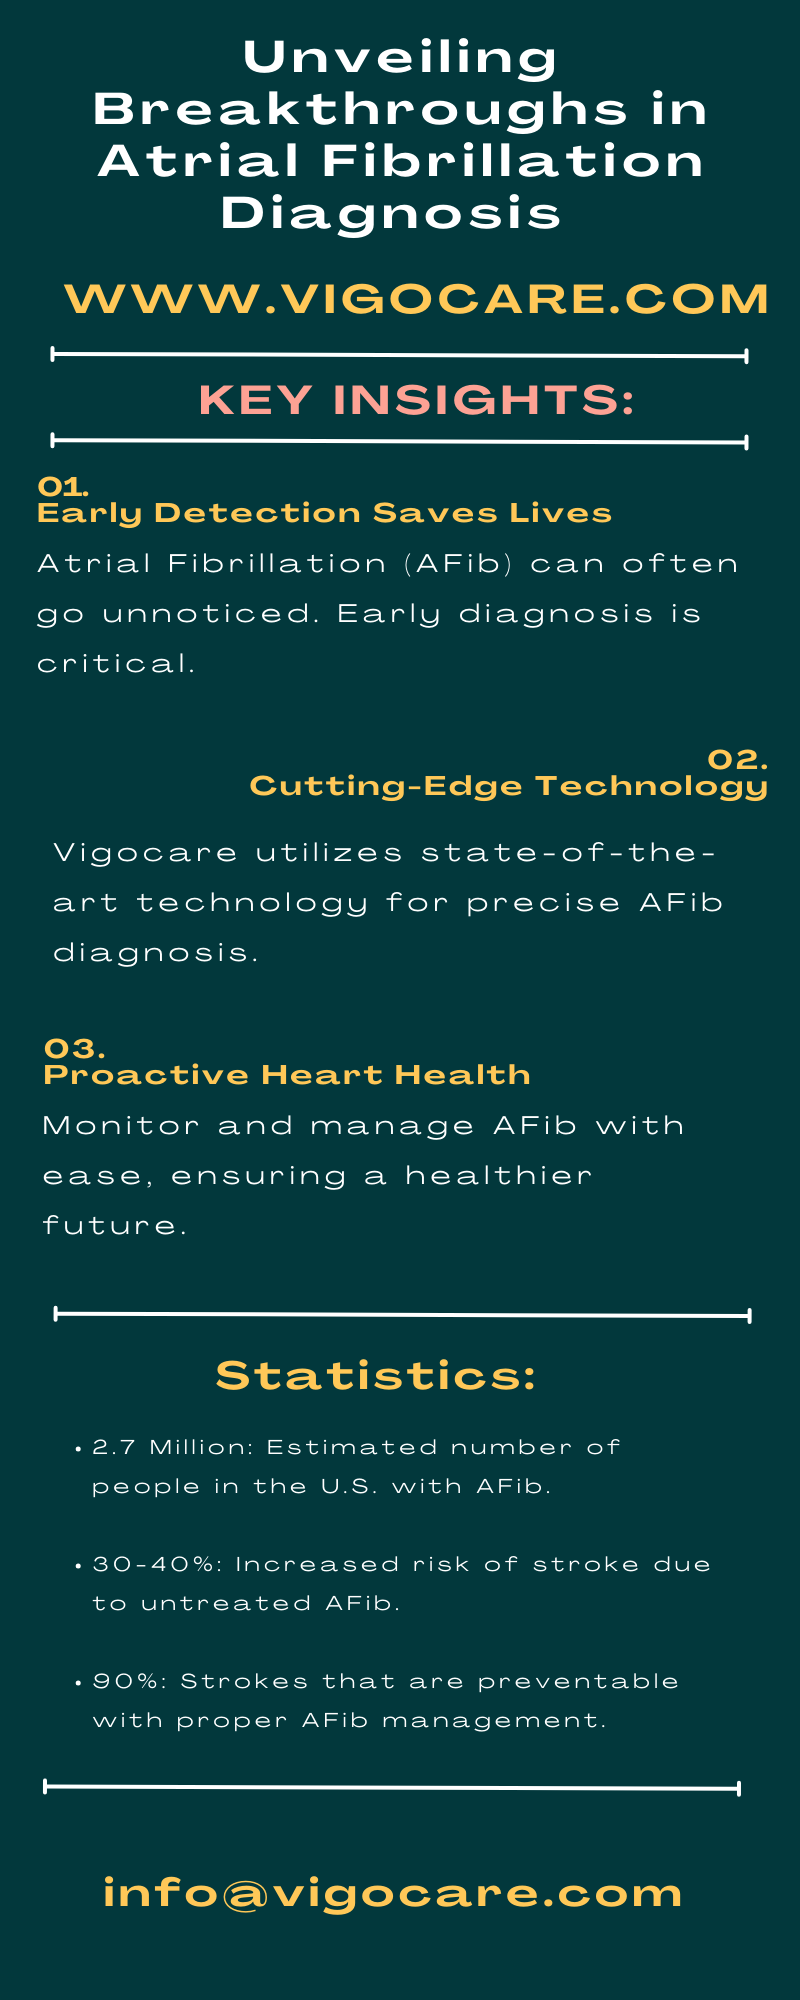 Unveiling Breakthroughs in Atrial Fibrillation Diagnosis Vigocare.png | Pearltrees